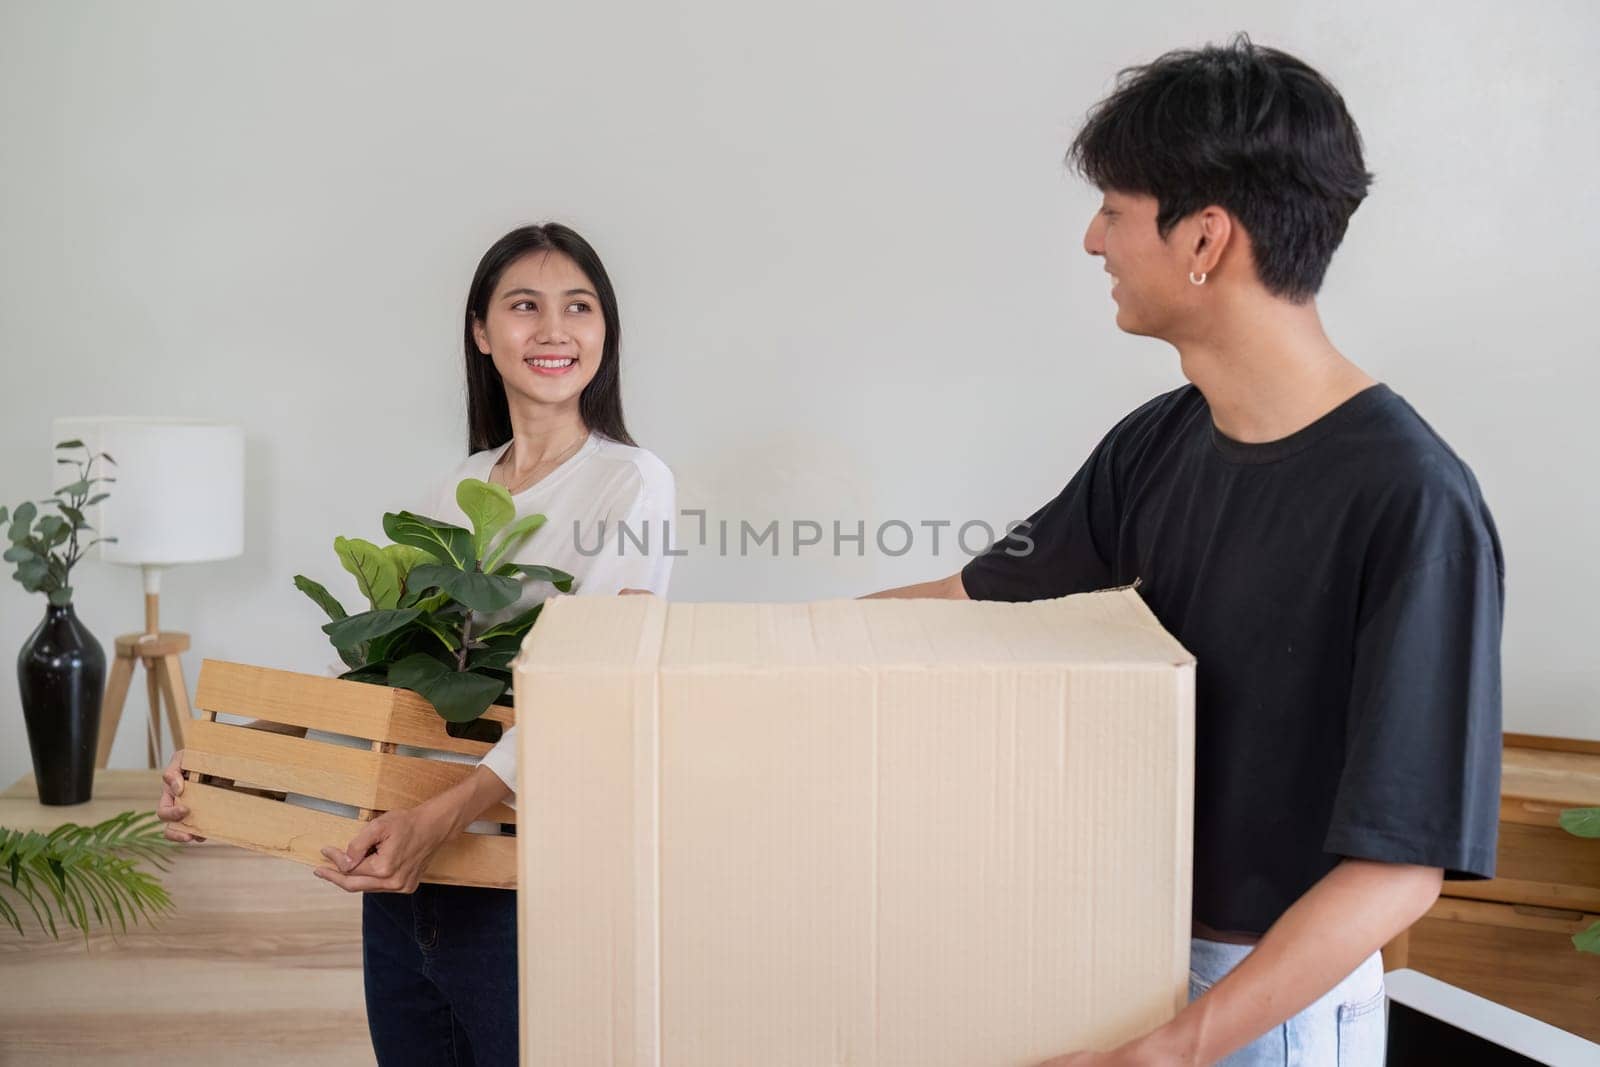 A young couple happily moving into their new house, carrying boxes and plants, symbolizing a fresh start in a modern home.